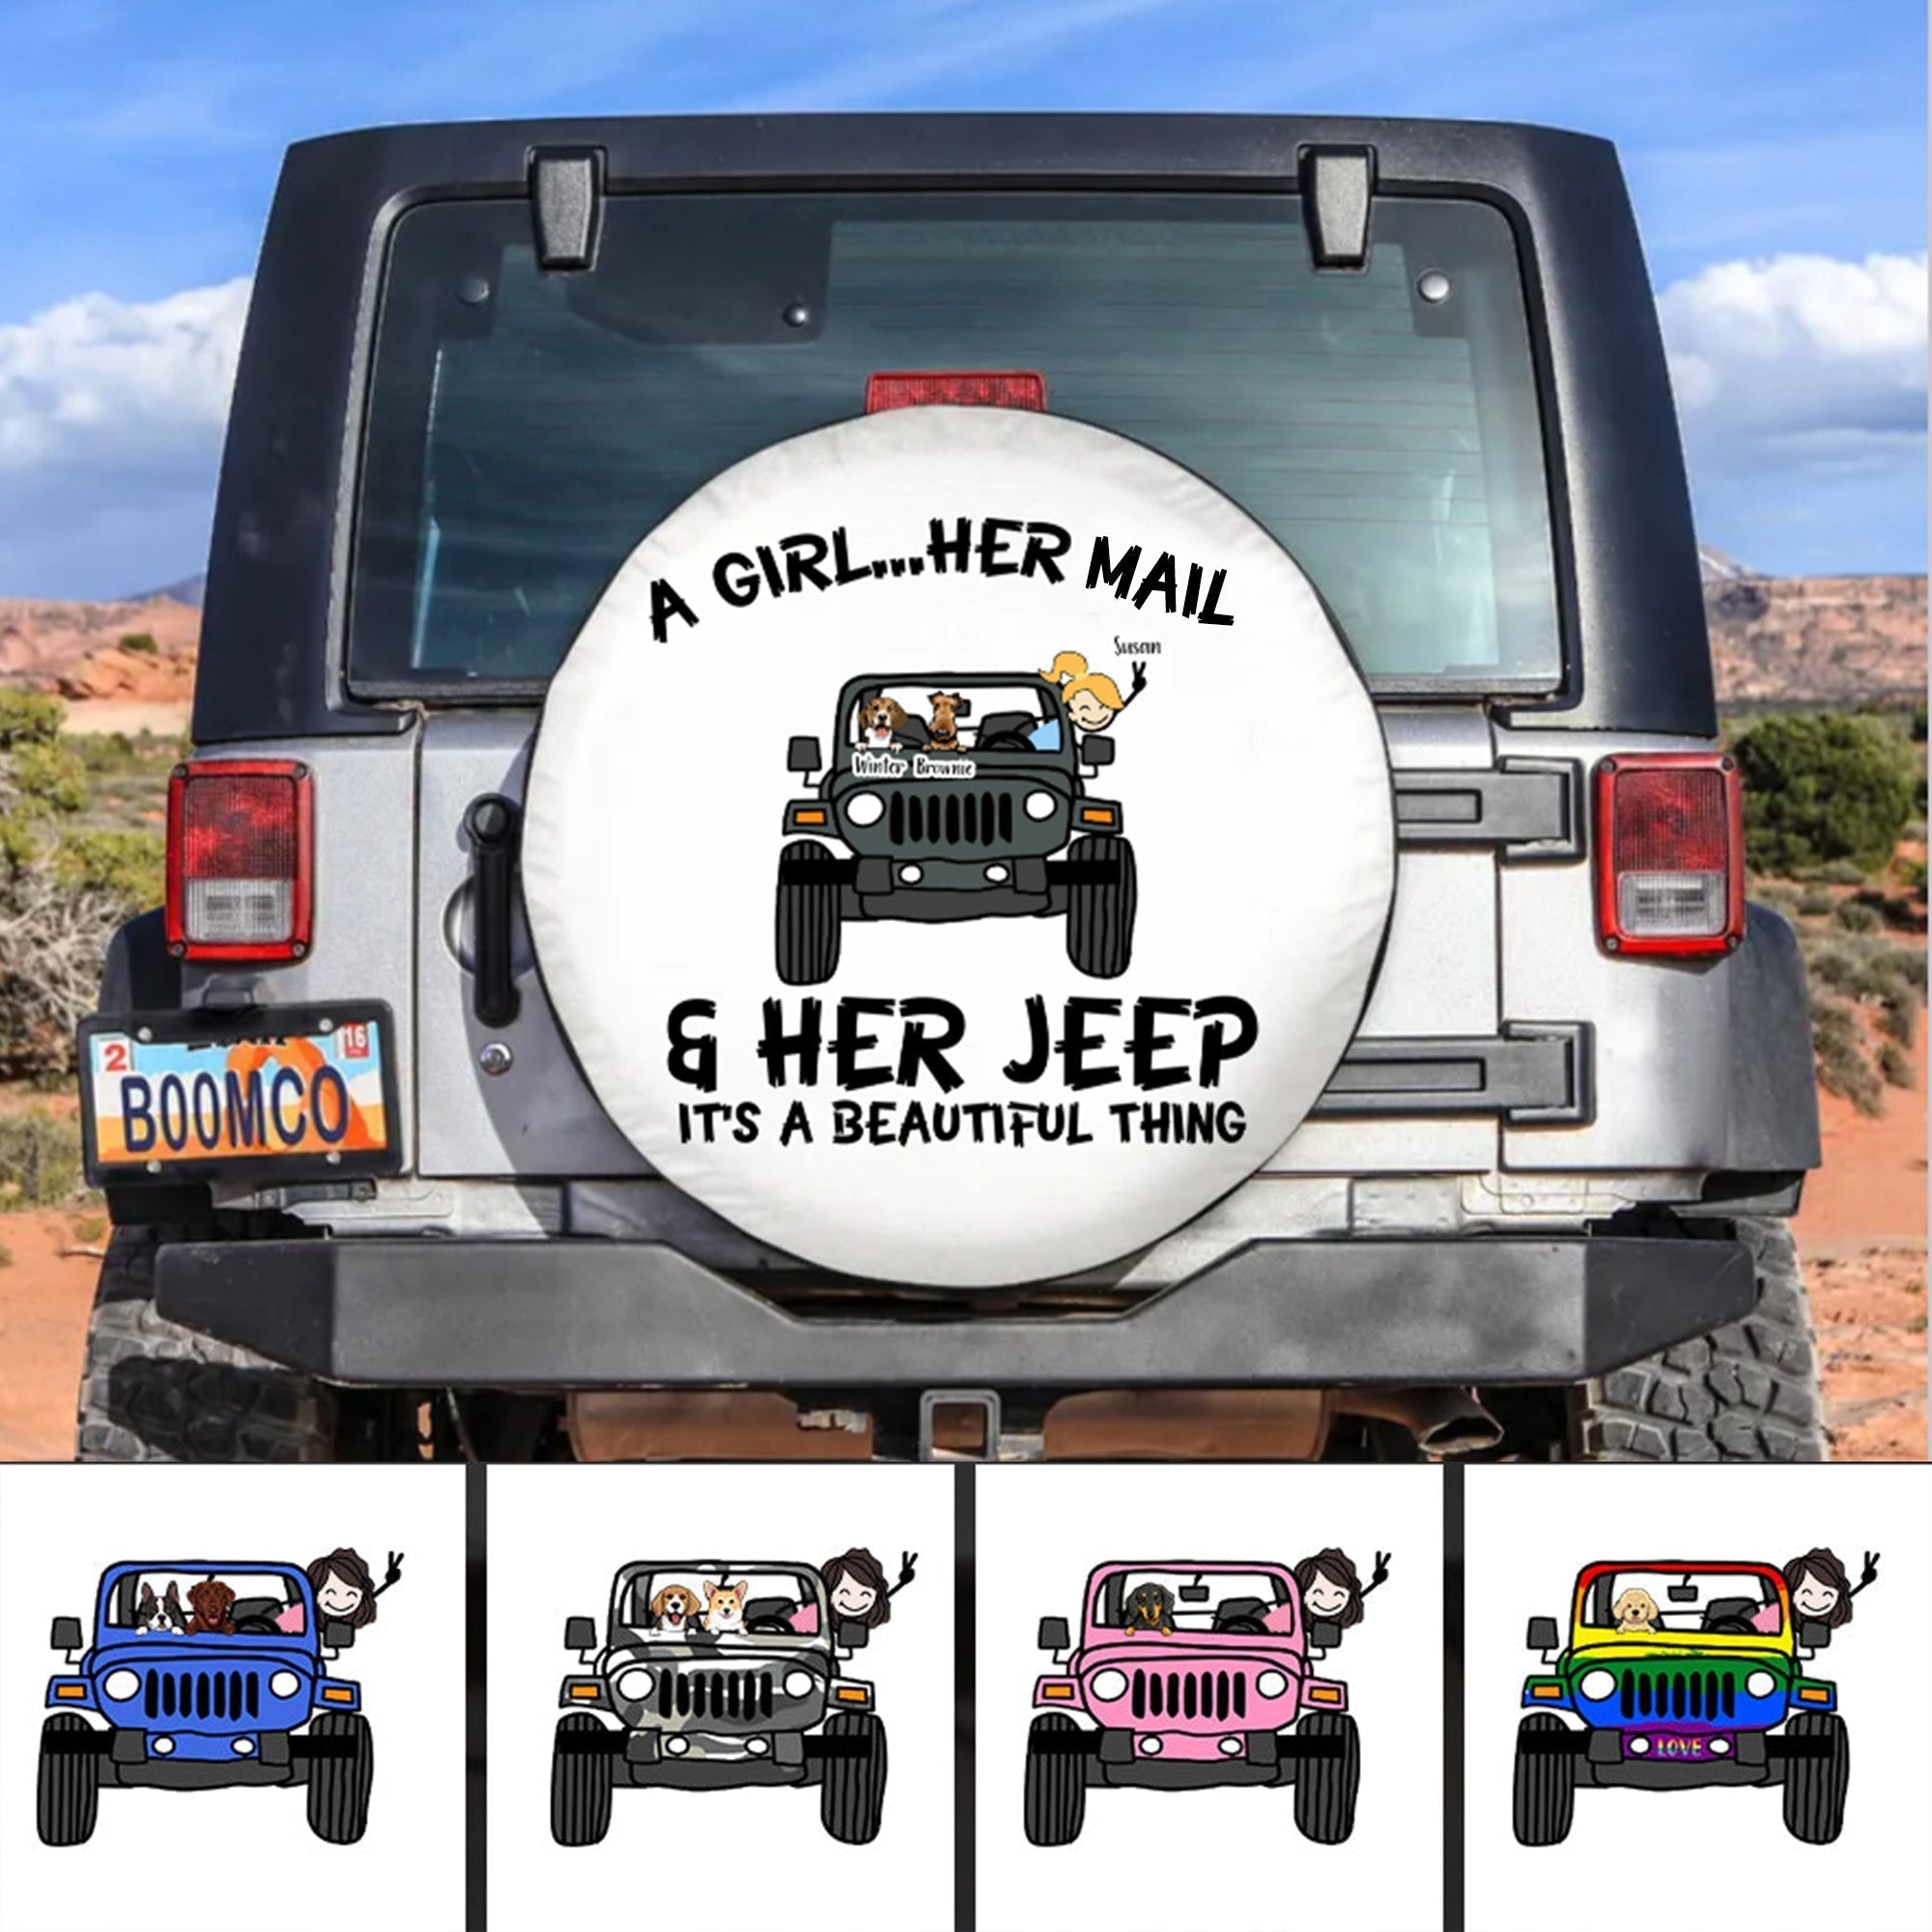 Custom Jeep Tire Cover With Camera Hole, Jeep Girl A Girl Her Mail Her Jeep Spare Tire Cover It's a Beautiful Thing White CTM Custom - Printyourwear